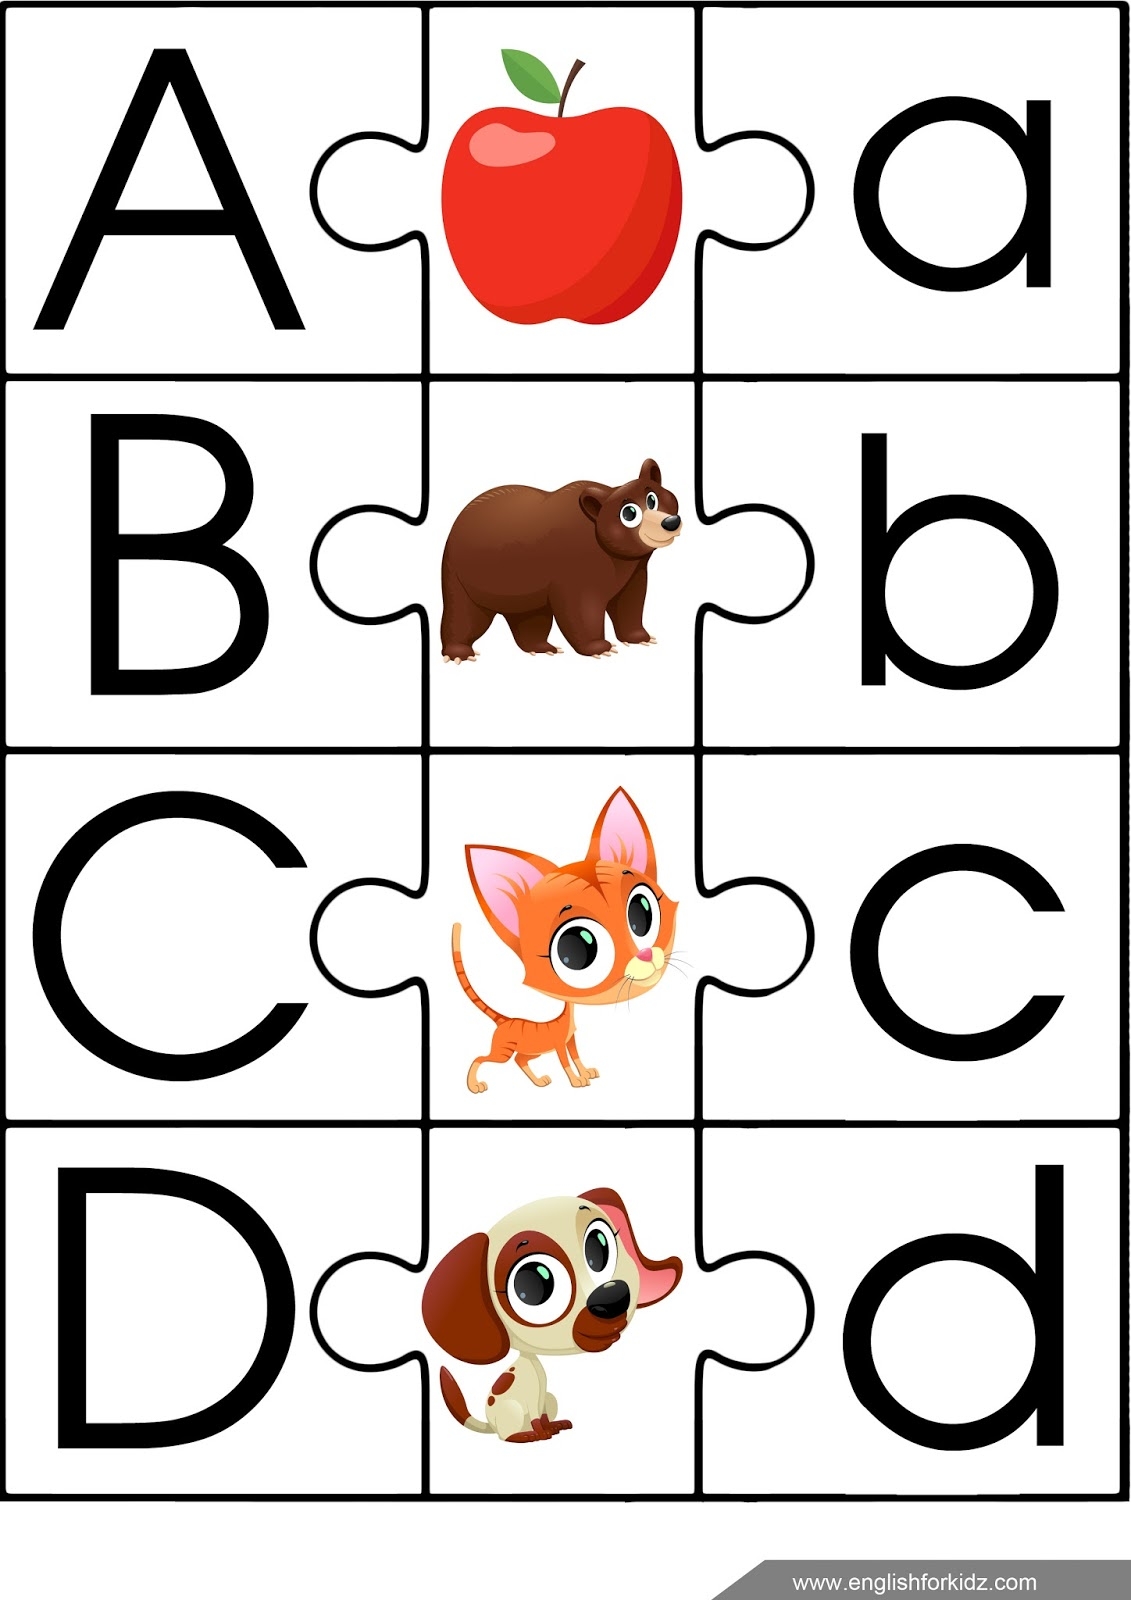 English For Kids Step By Step ESL Game Alphabet Puzzle - Free Printable Alphabet Puzzles